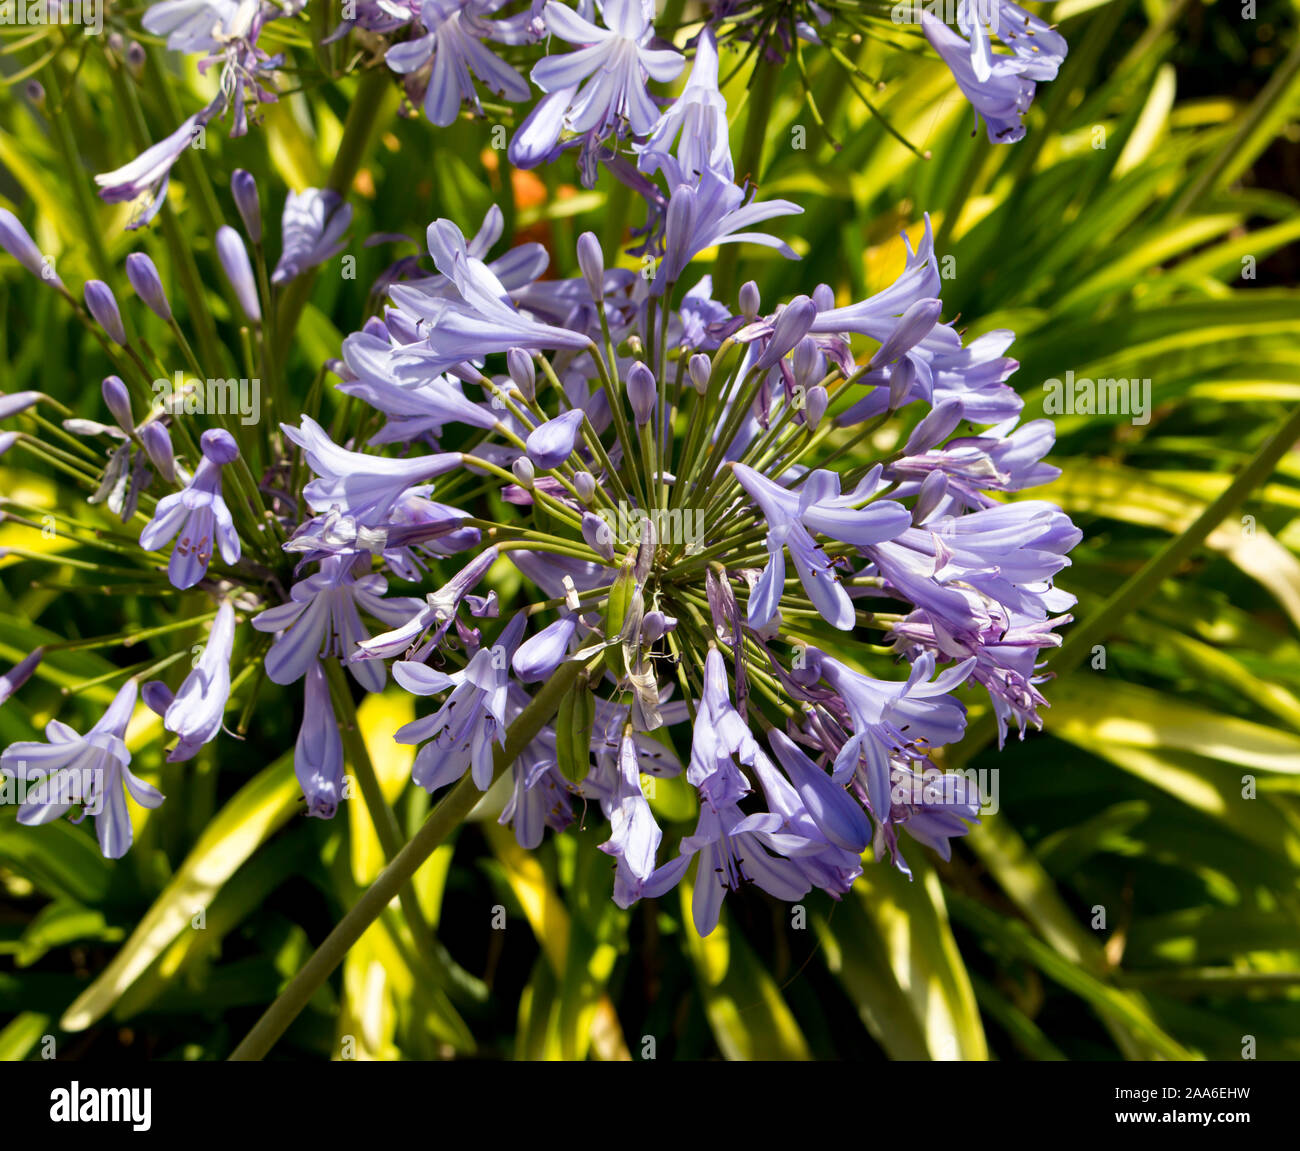 Stately purple agapanthus Lily of the Nile  genus in subfamily Agapanthoideae of plant family Amaryllidaceae contrasted against a concrete wall . Stock Photo